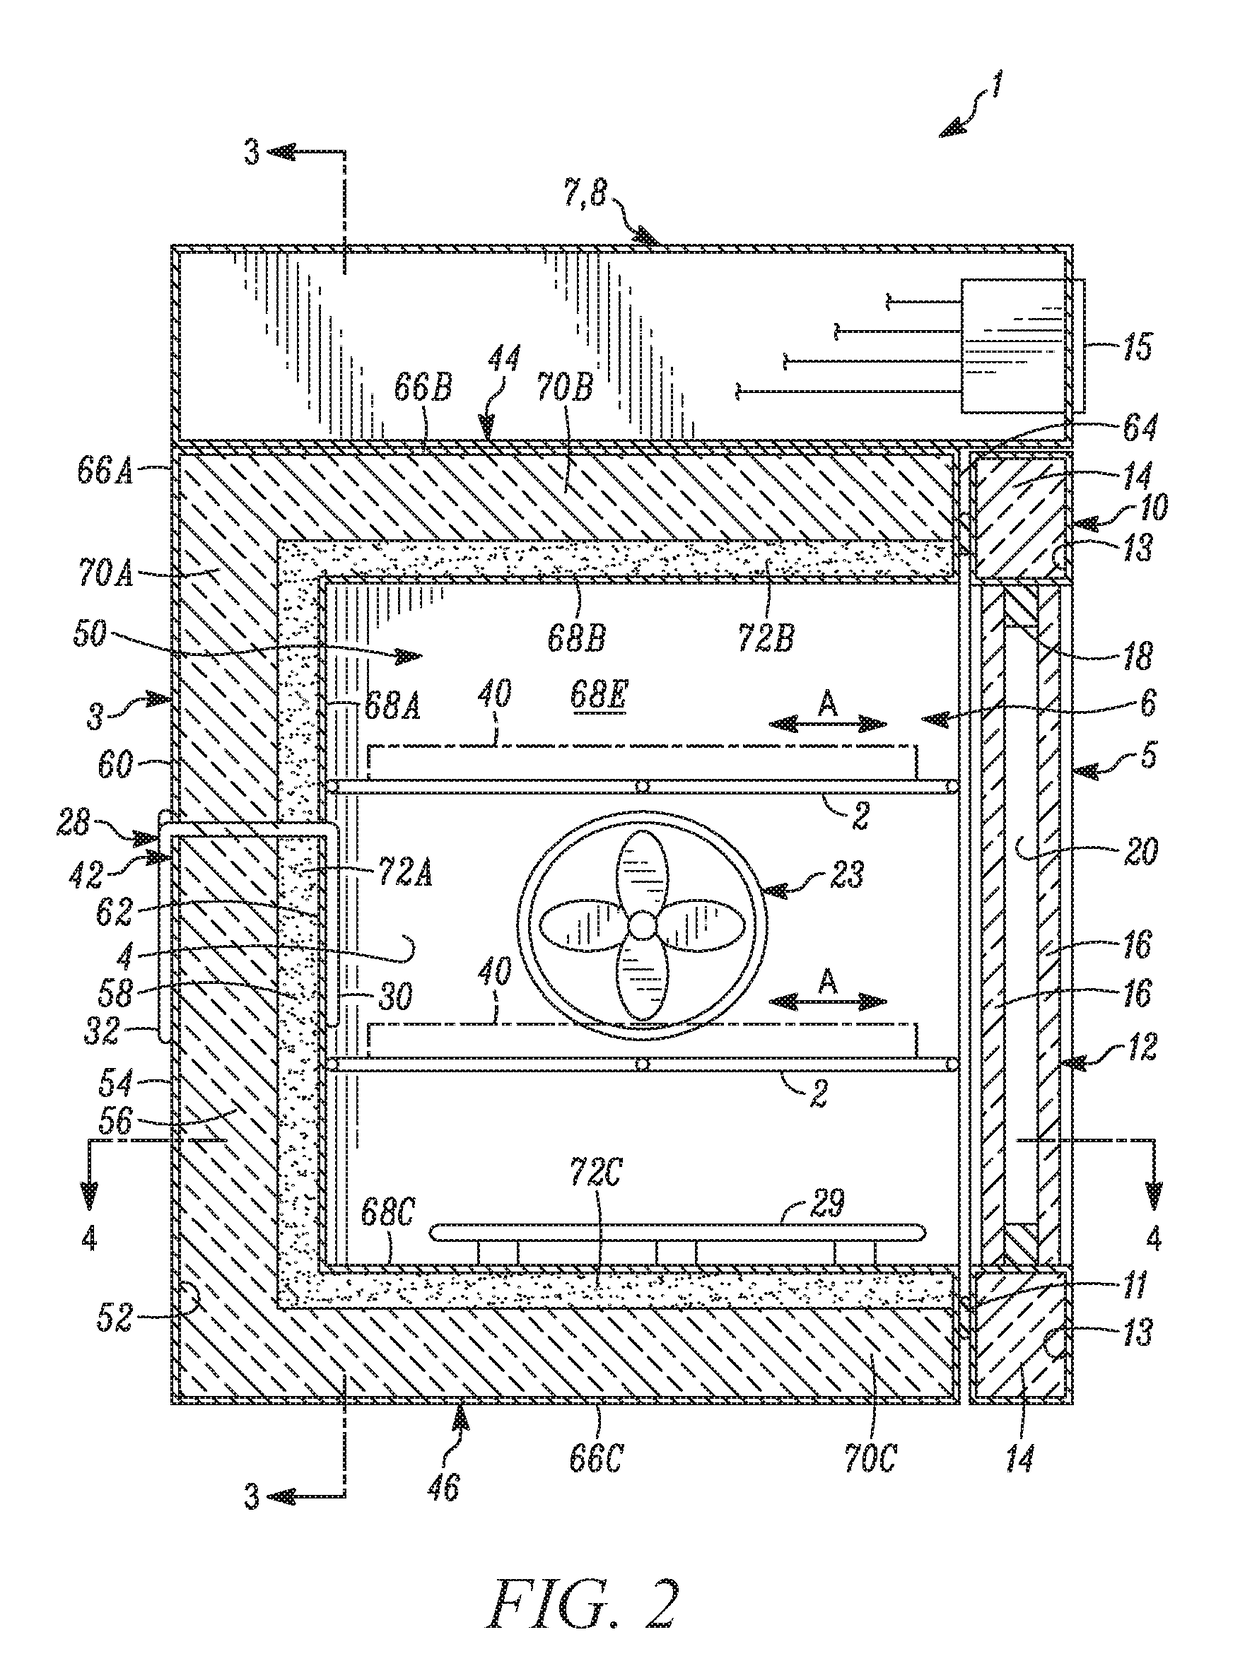 Insulated chamber with packetized phase change material